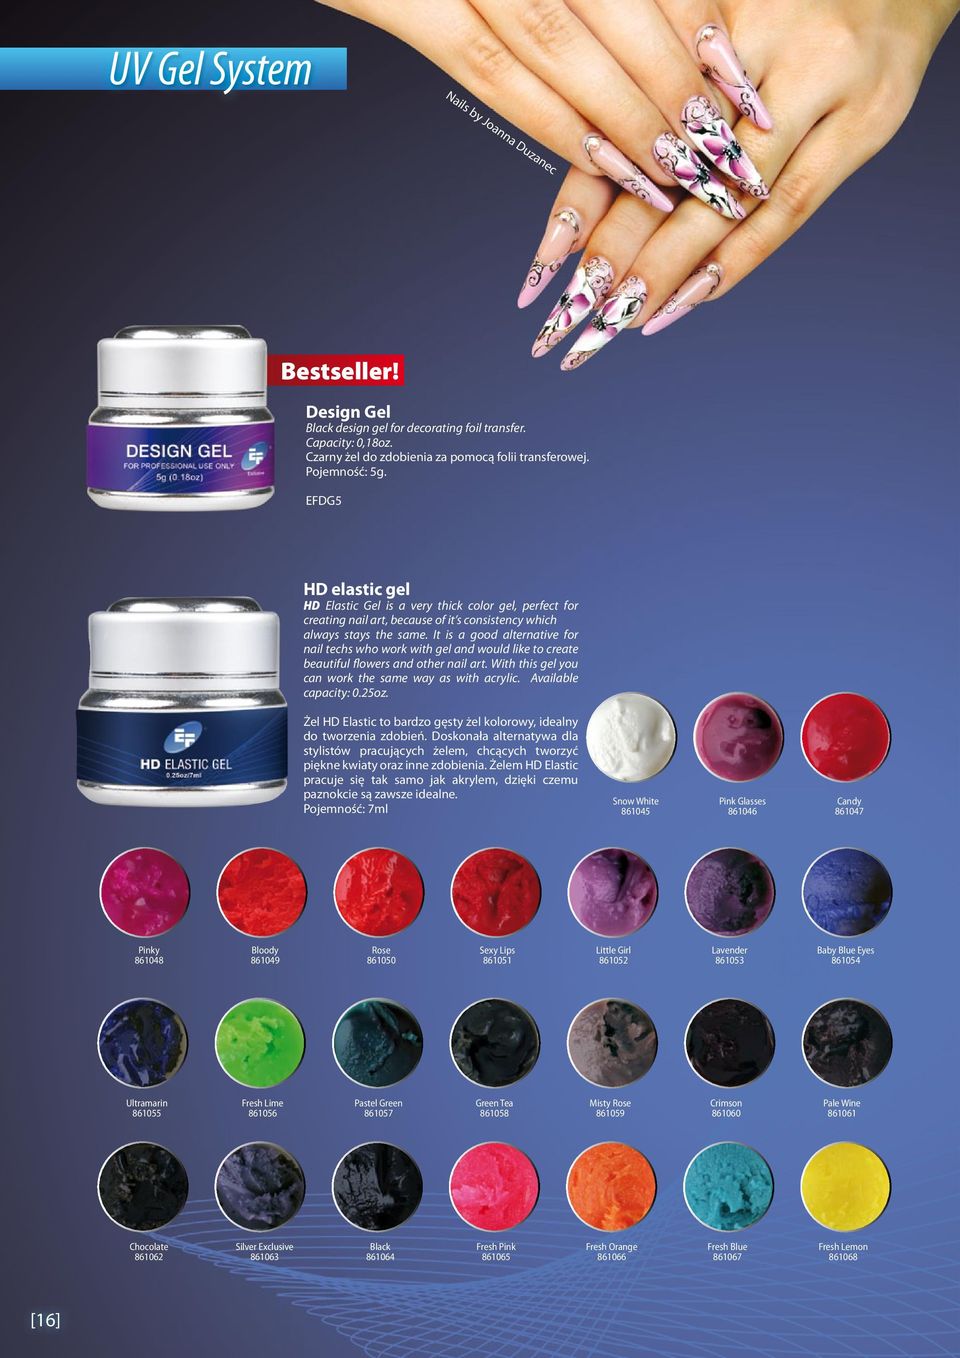 It is a good alternative for nail techs who work with gel and would like to create beautiful flowers and other nail art. With this gel you can work the same way as with acrylic. Available capacity: 0.